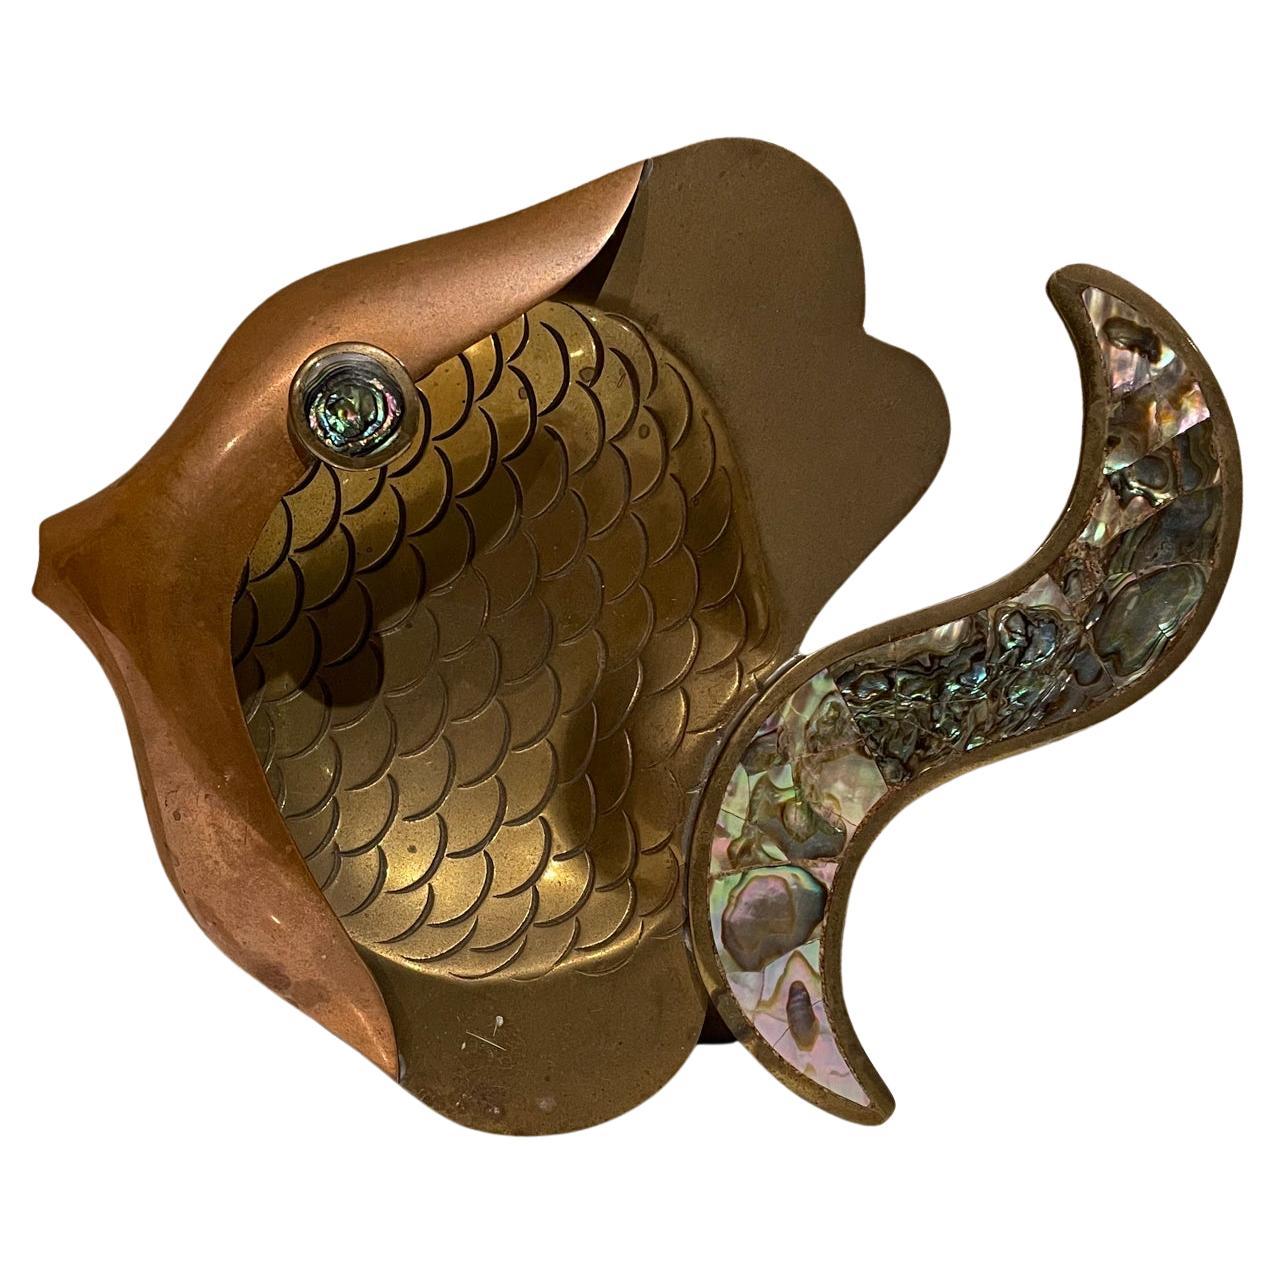 Decorative fish dish
Mexico style of Los Castillo Decorative Ashtray (it can be hung on the wall as an art sculpture or placed on a table as catch all tray).
Signed underneath Chavez 99.
Brass, copper (married metals) & abalone.
1.5 tall x 6 w x